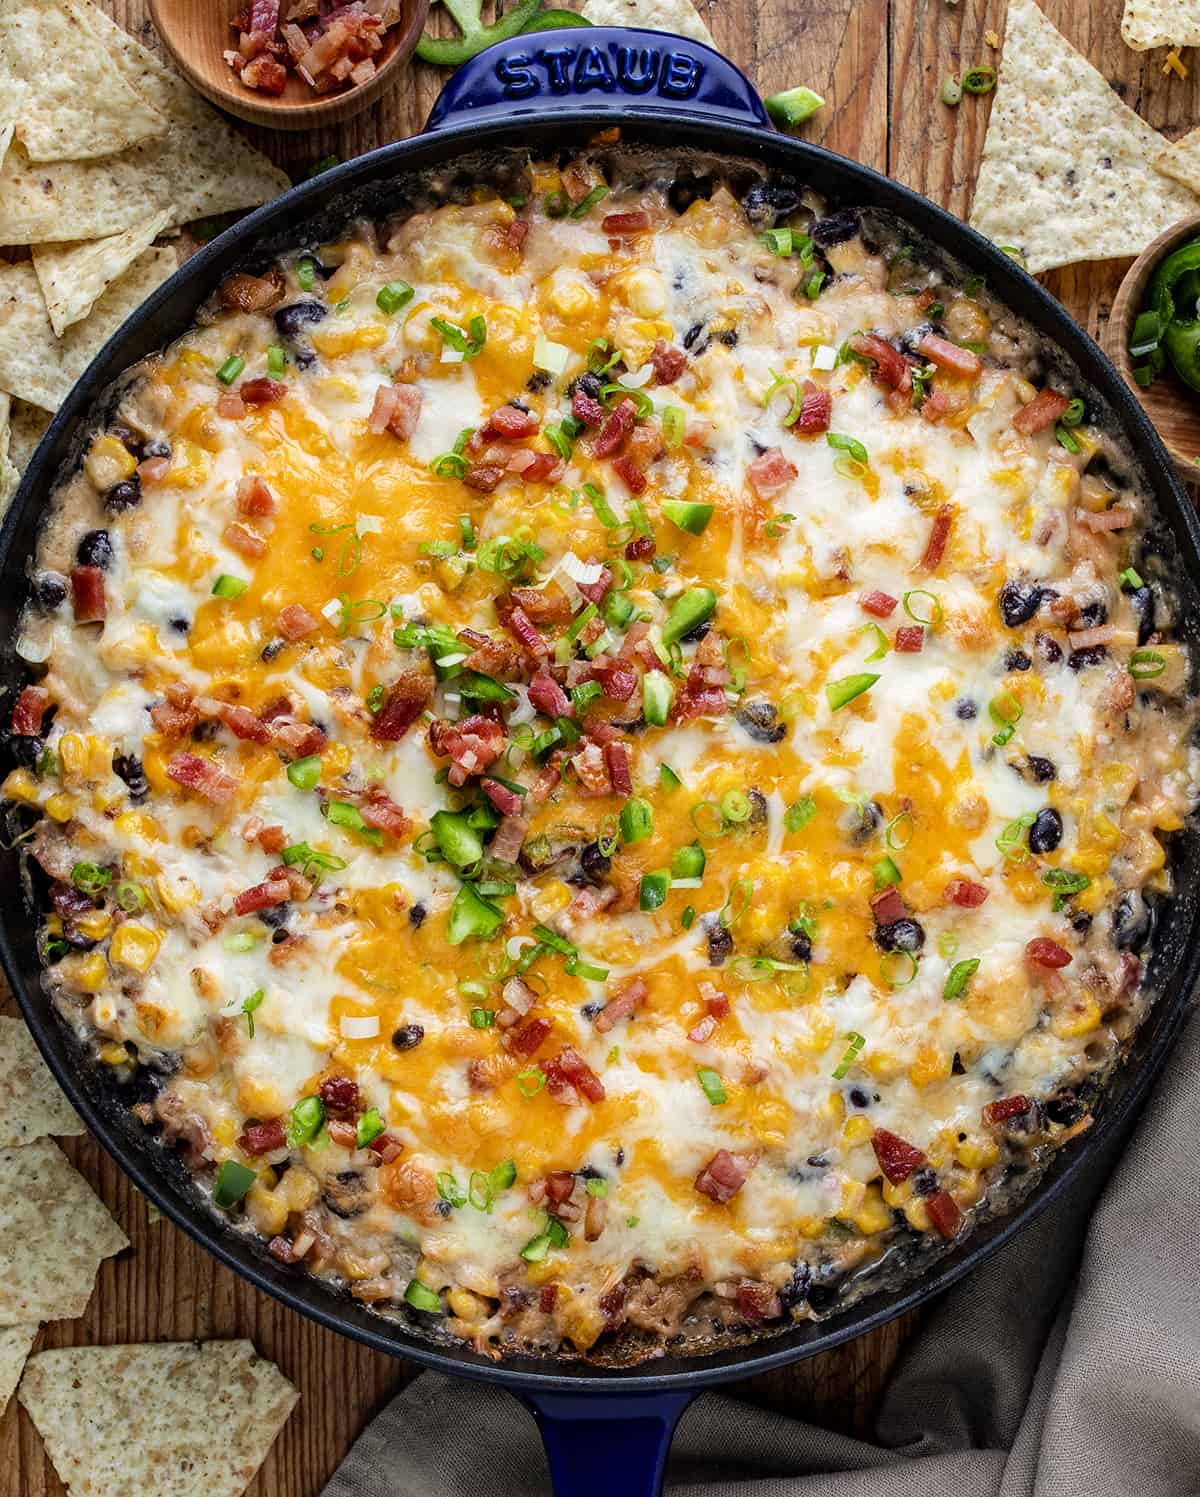 Skillet of Bakied Cheesy Baked Cowboy Dip with Chips Around it From Overhead. 